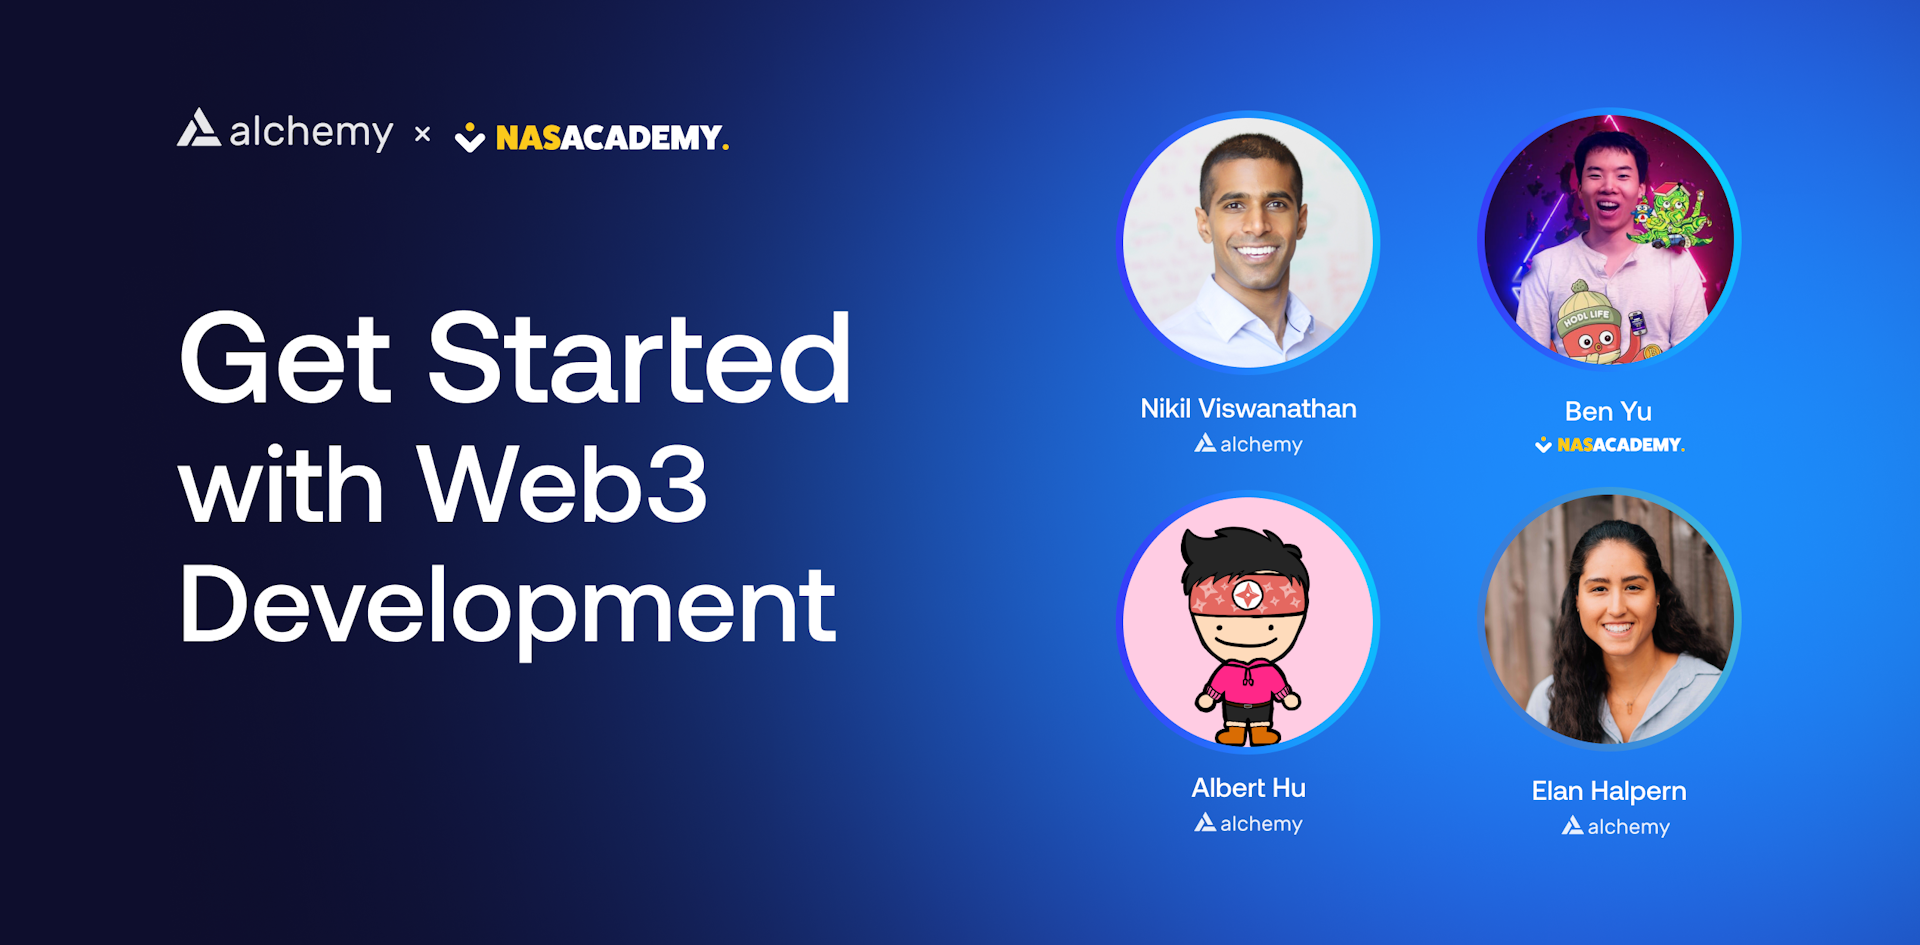 Learn how to build on Web3 with Alchemy and Nas Academy thumbnail